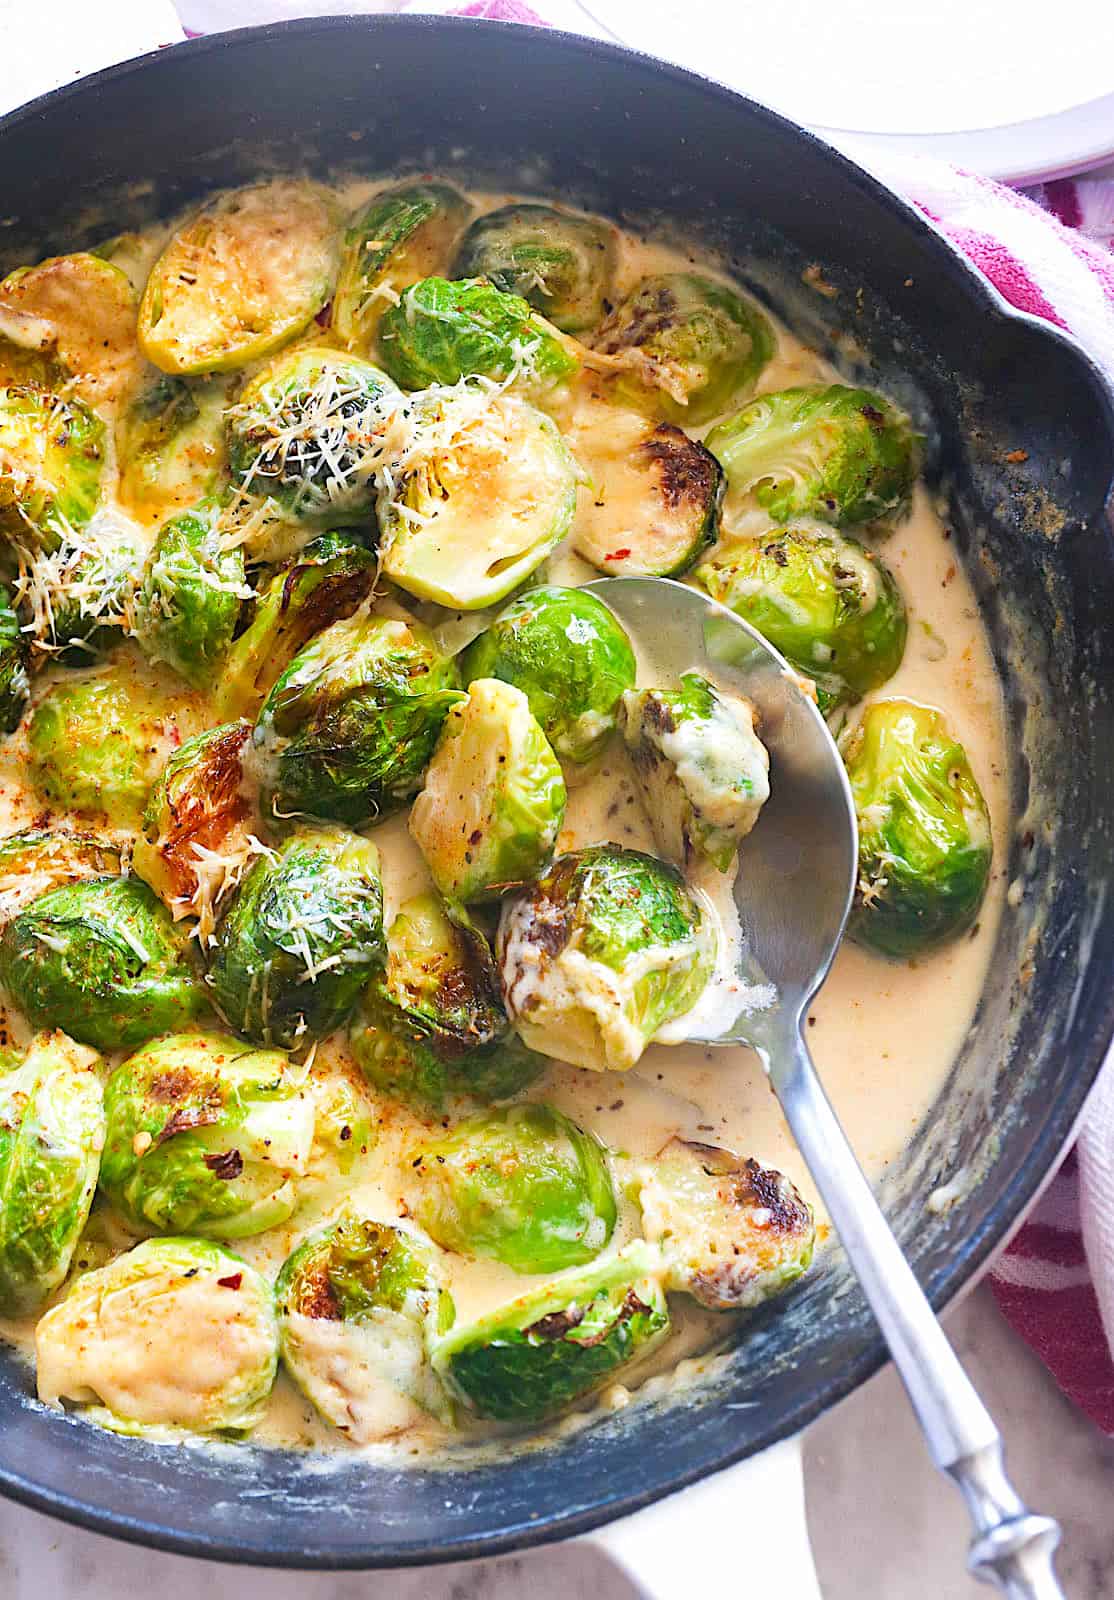 Serve insanely delicious creamy Brussels sprouts